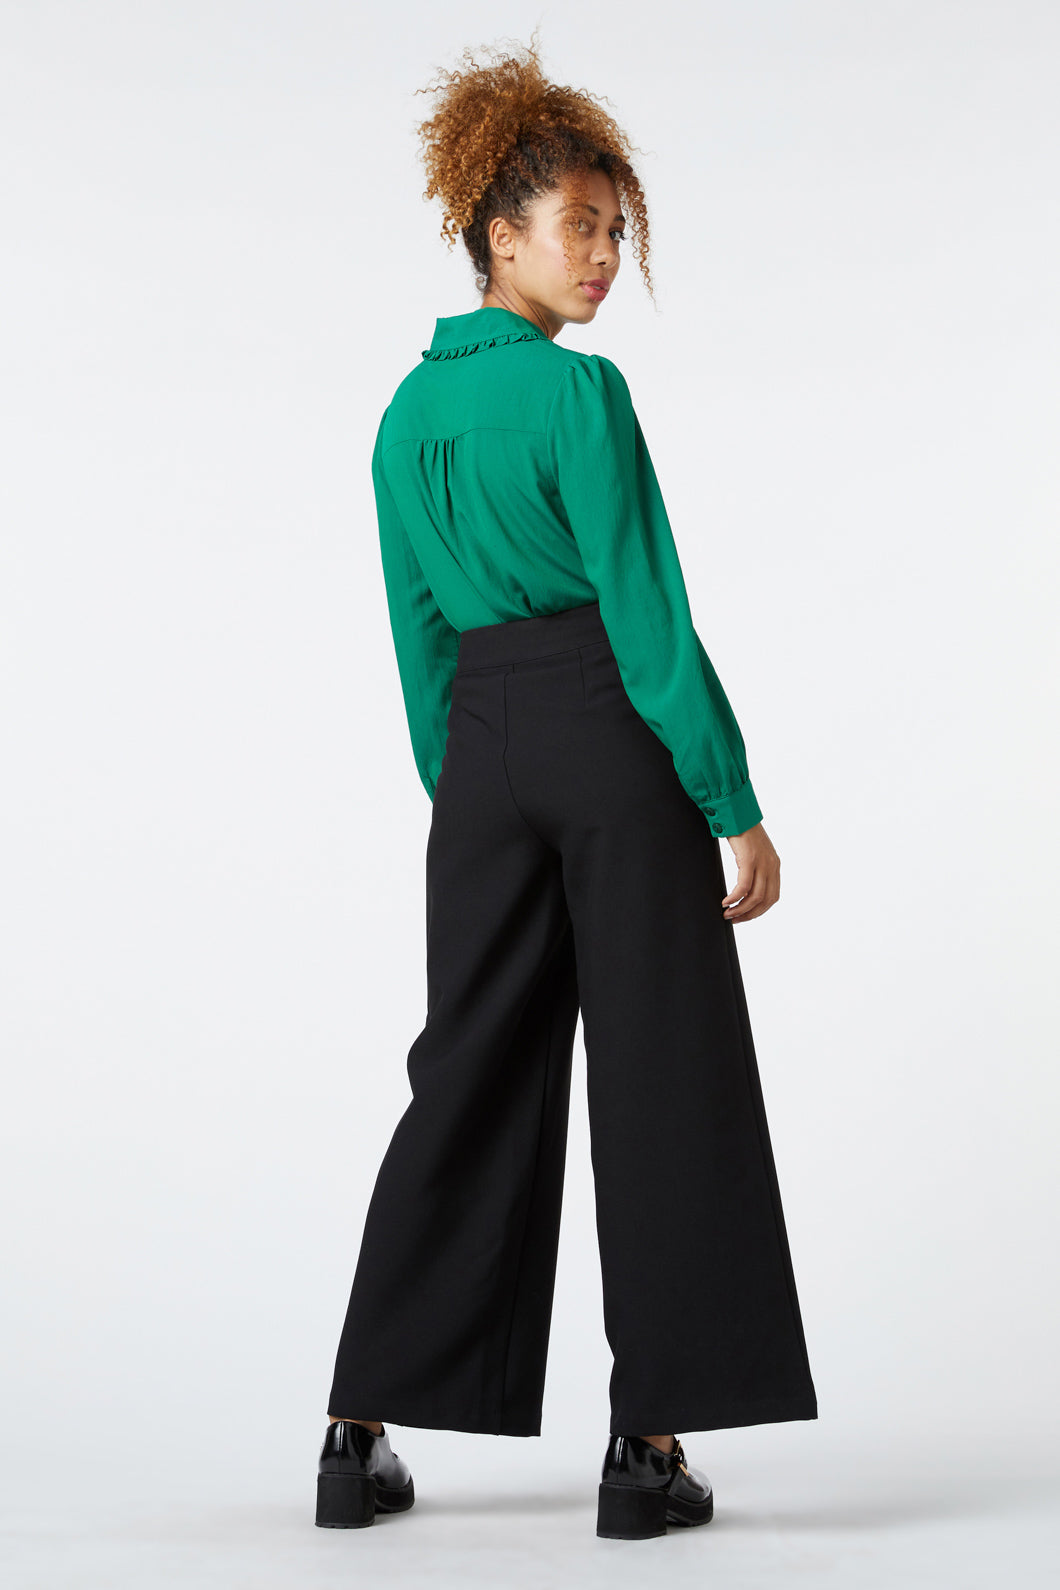 Buy Women's Palazzos With Extra Flare Online| The Feel Good Studio